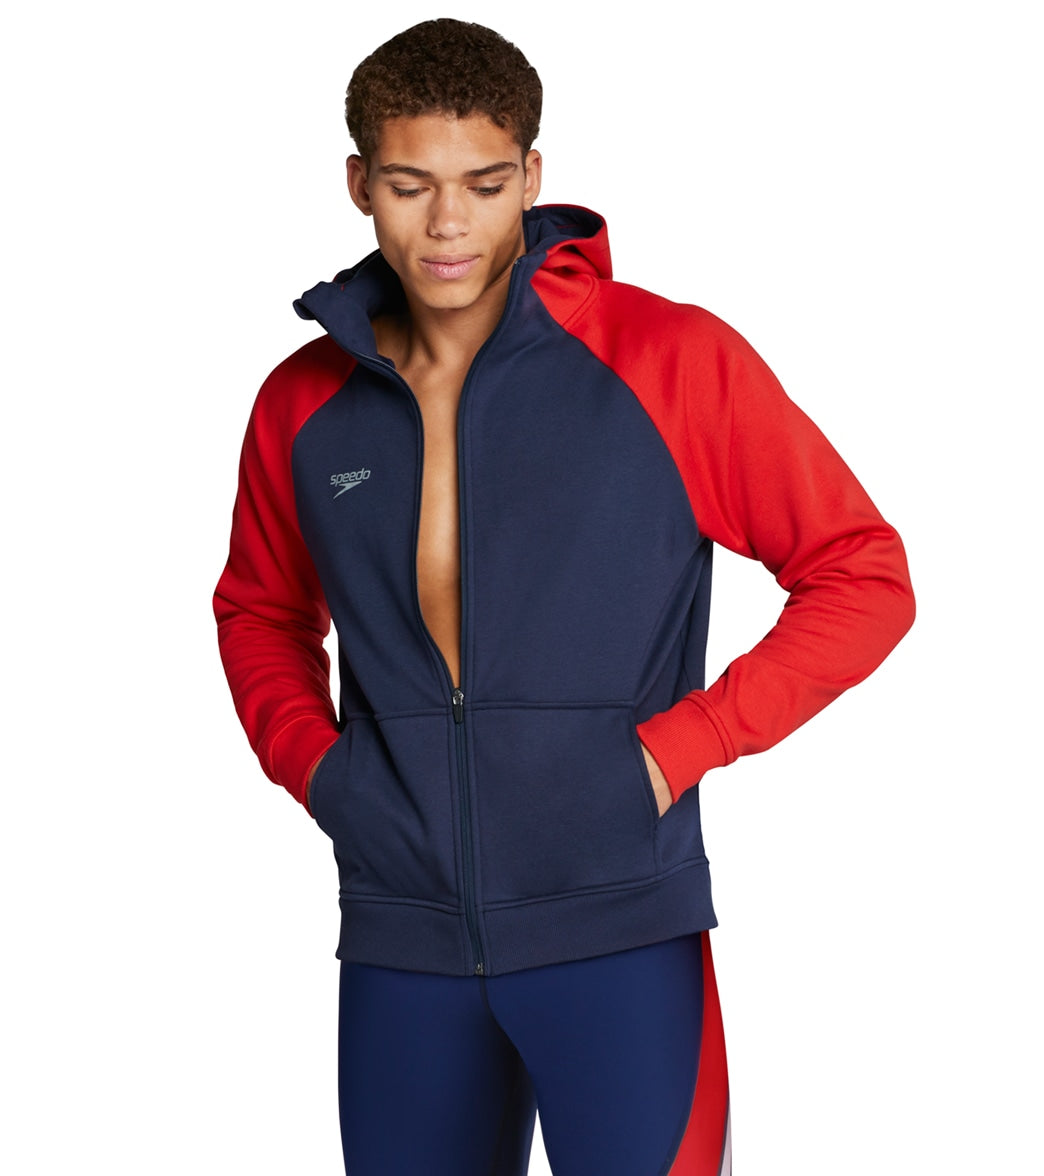 Speedo Men's Team Jacket - Red/White/Blue Large Size Large Cotton/Polyester - Swimoutlet.com